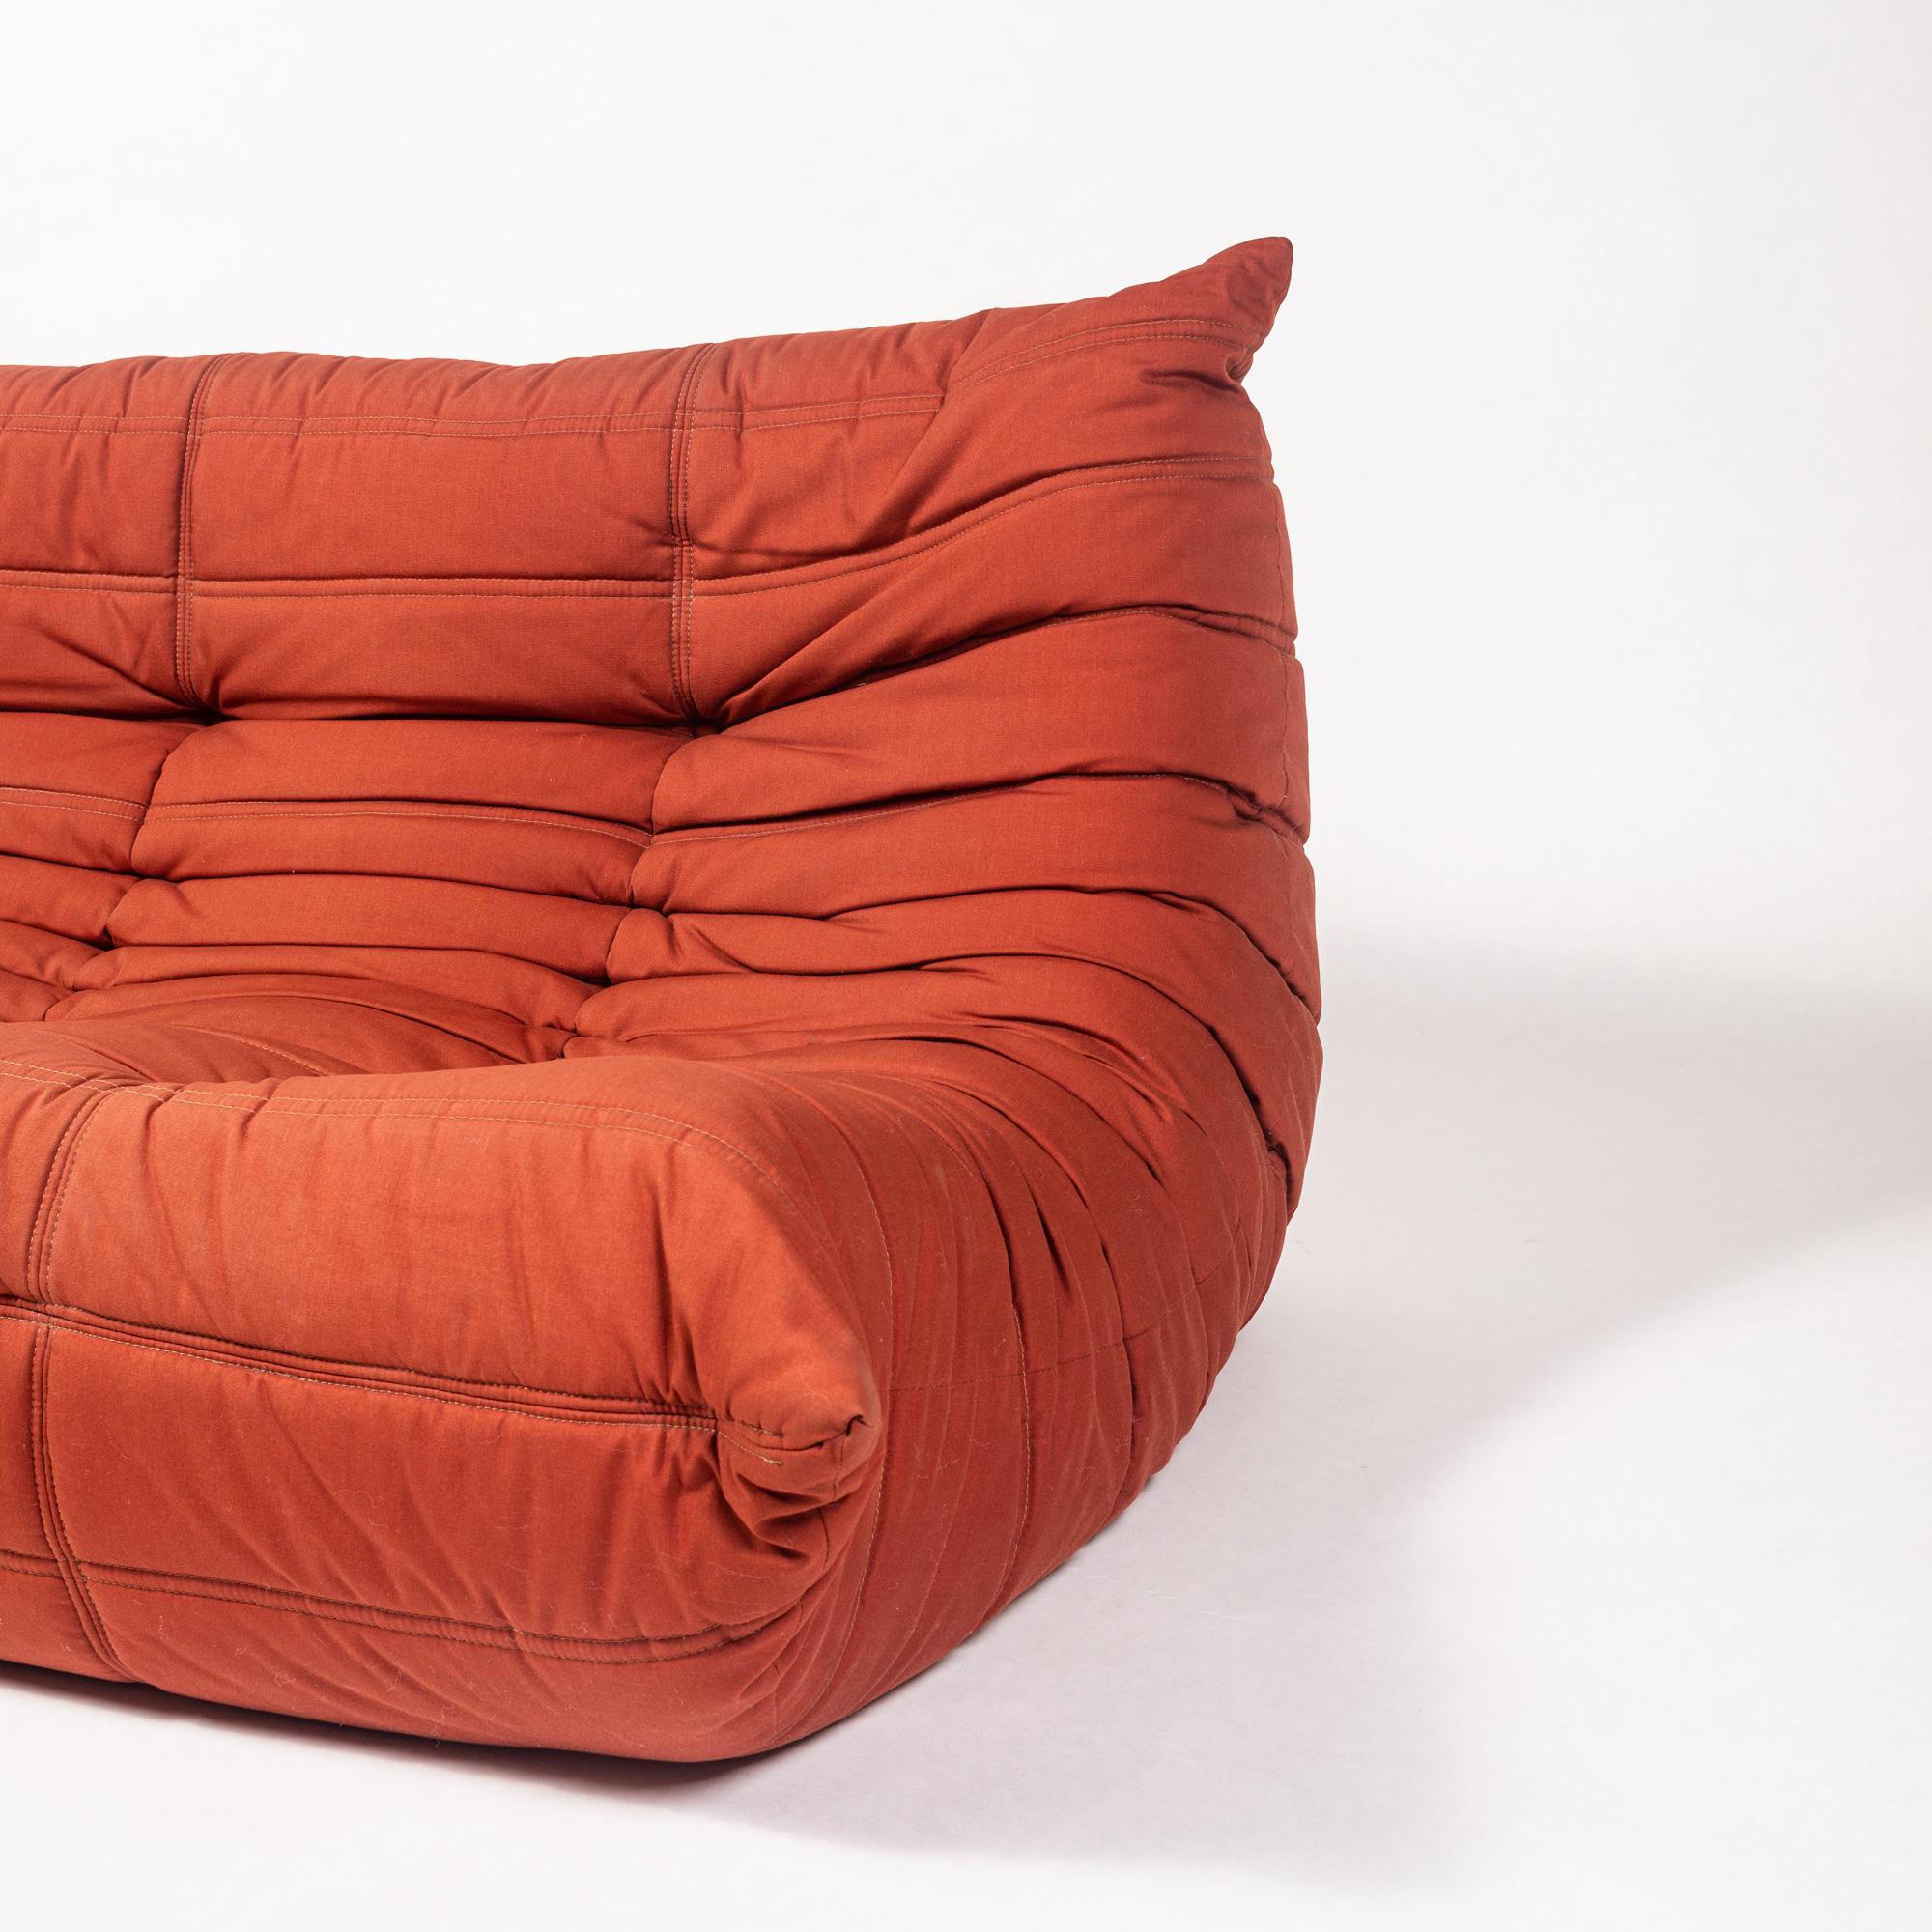 This is a rare & unique piece created by Arconas - a licensed North American manufacturer of Ligne Roset for a brief period in the 80s. After this short timeframe, Ligne Roset decided to export Togos from France instead of keeping a studio in